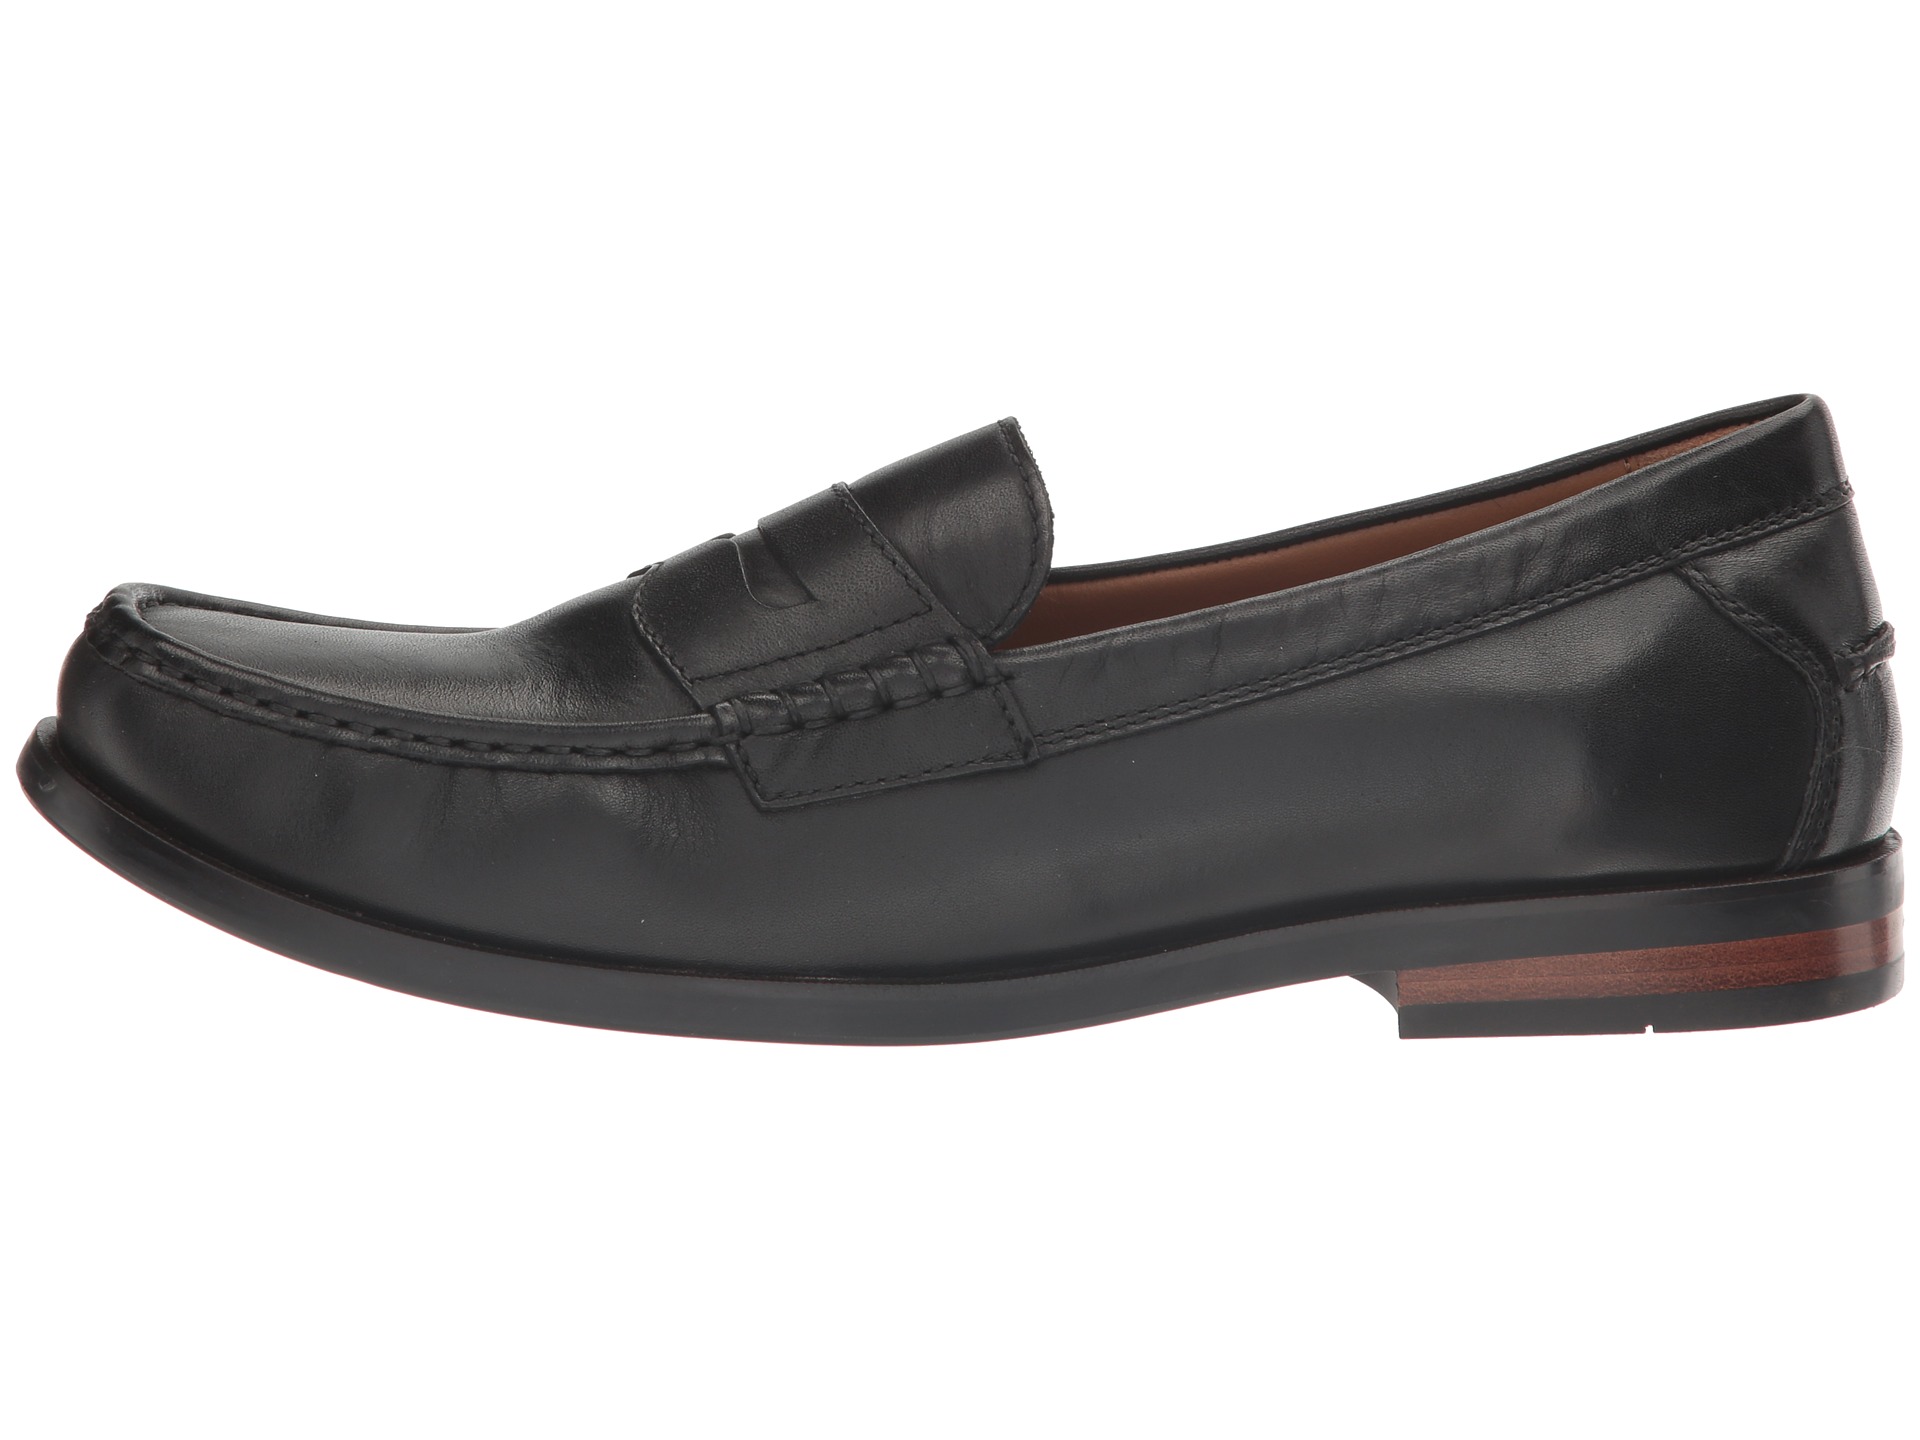 Cole Haan Pinch Friday Contemporary at Zappos.com